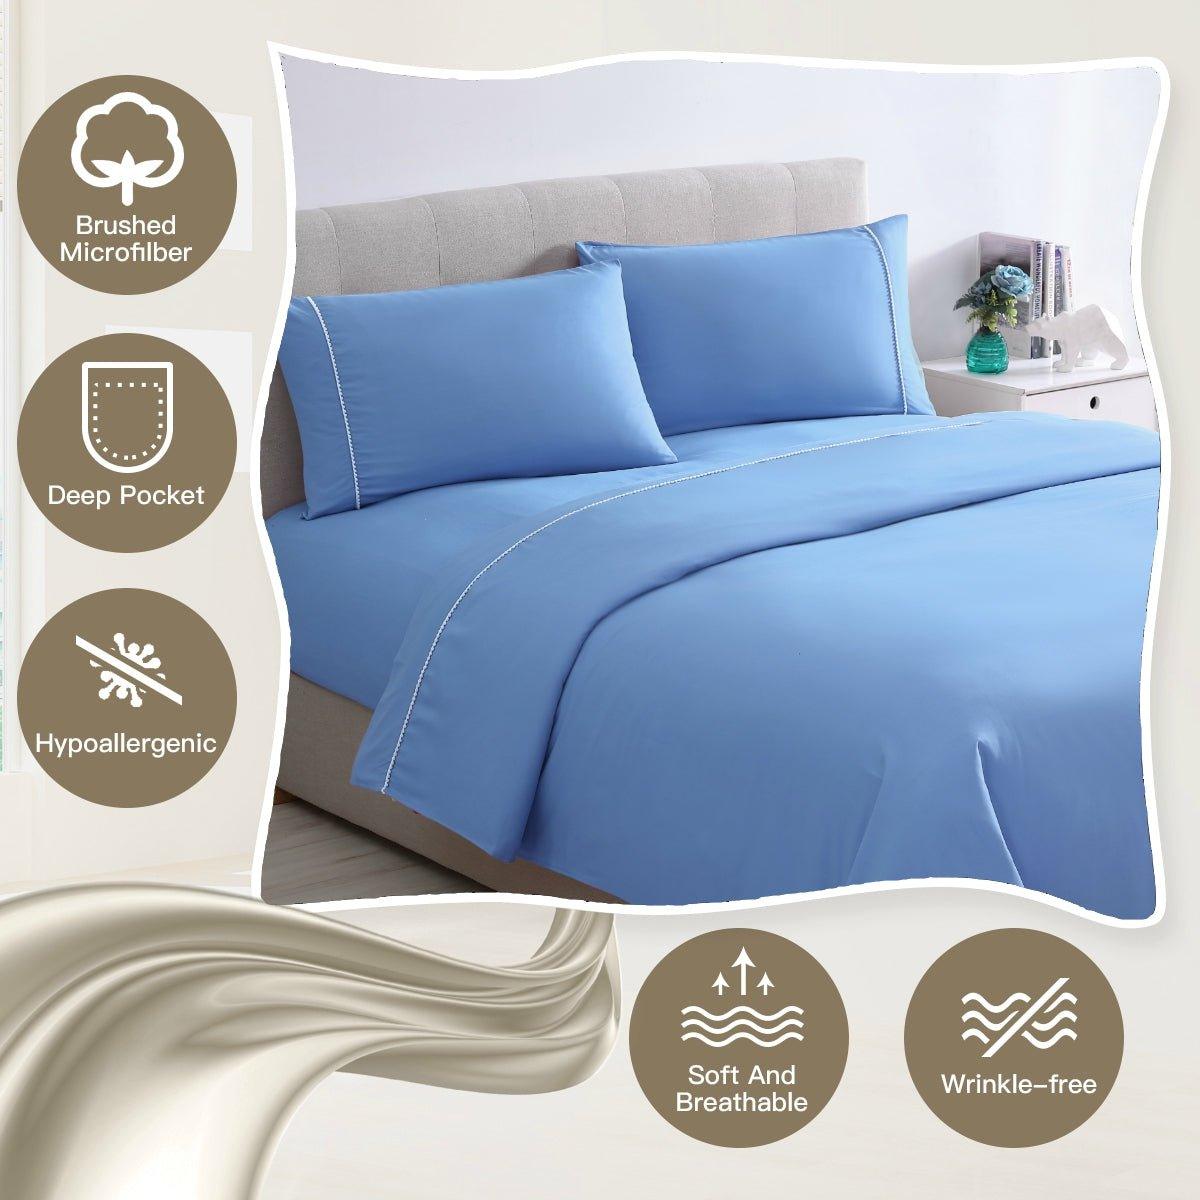 5 bed sheet colors to improve sleep: experts share their favorites